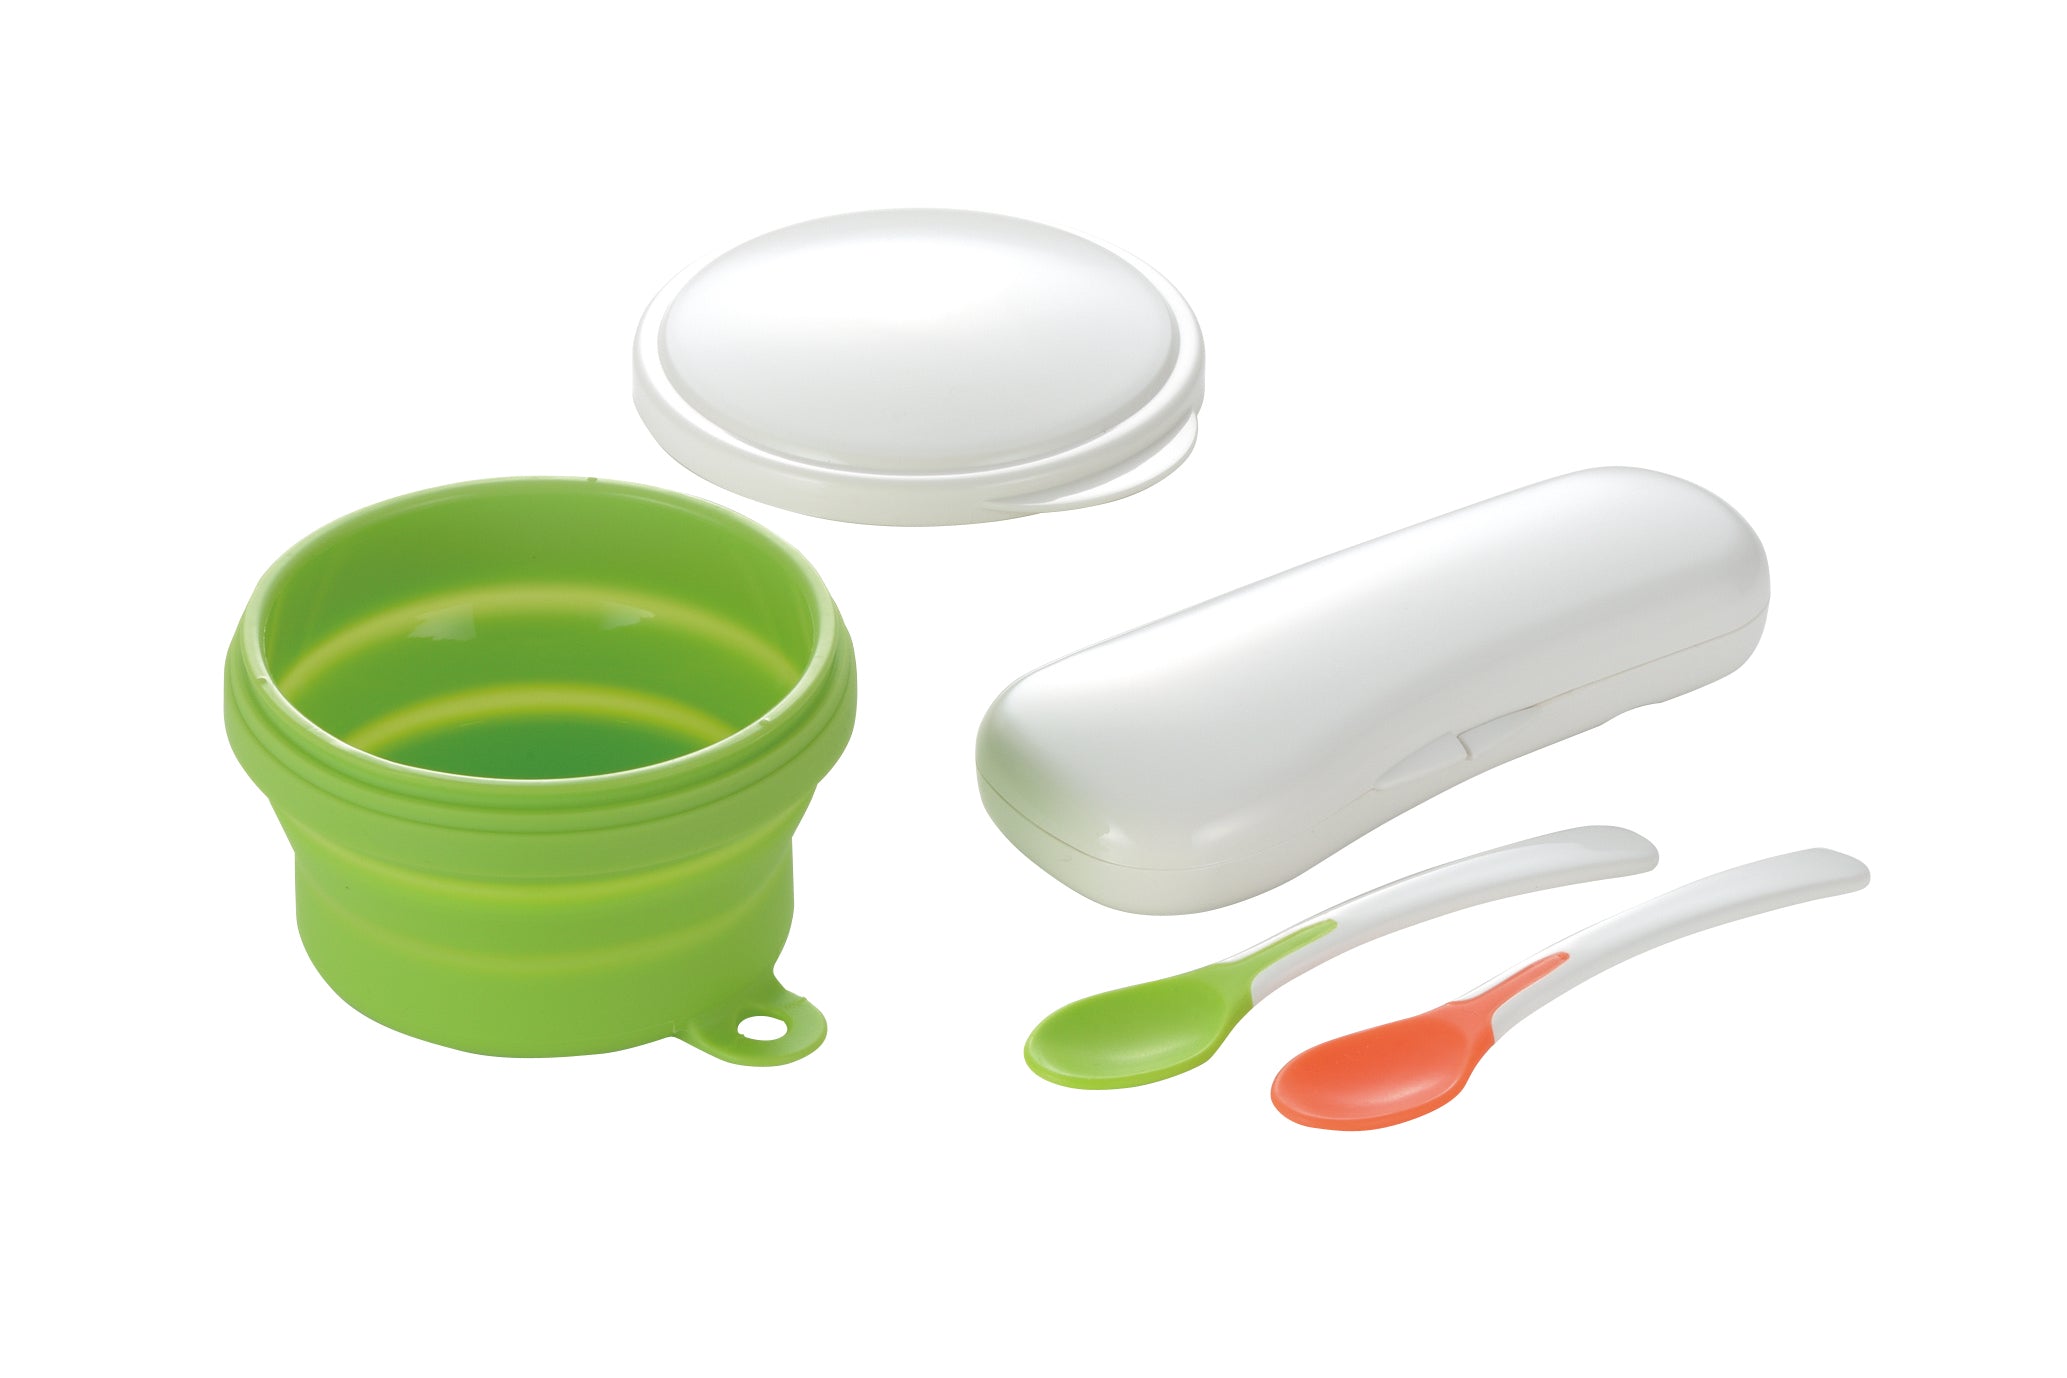 Richell Collapsible Bowl with Spoon